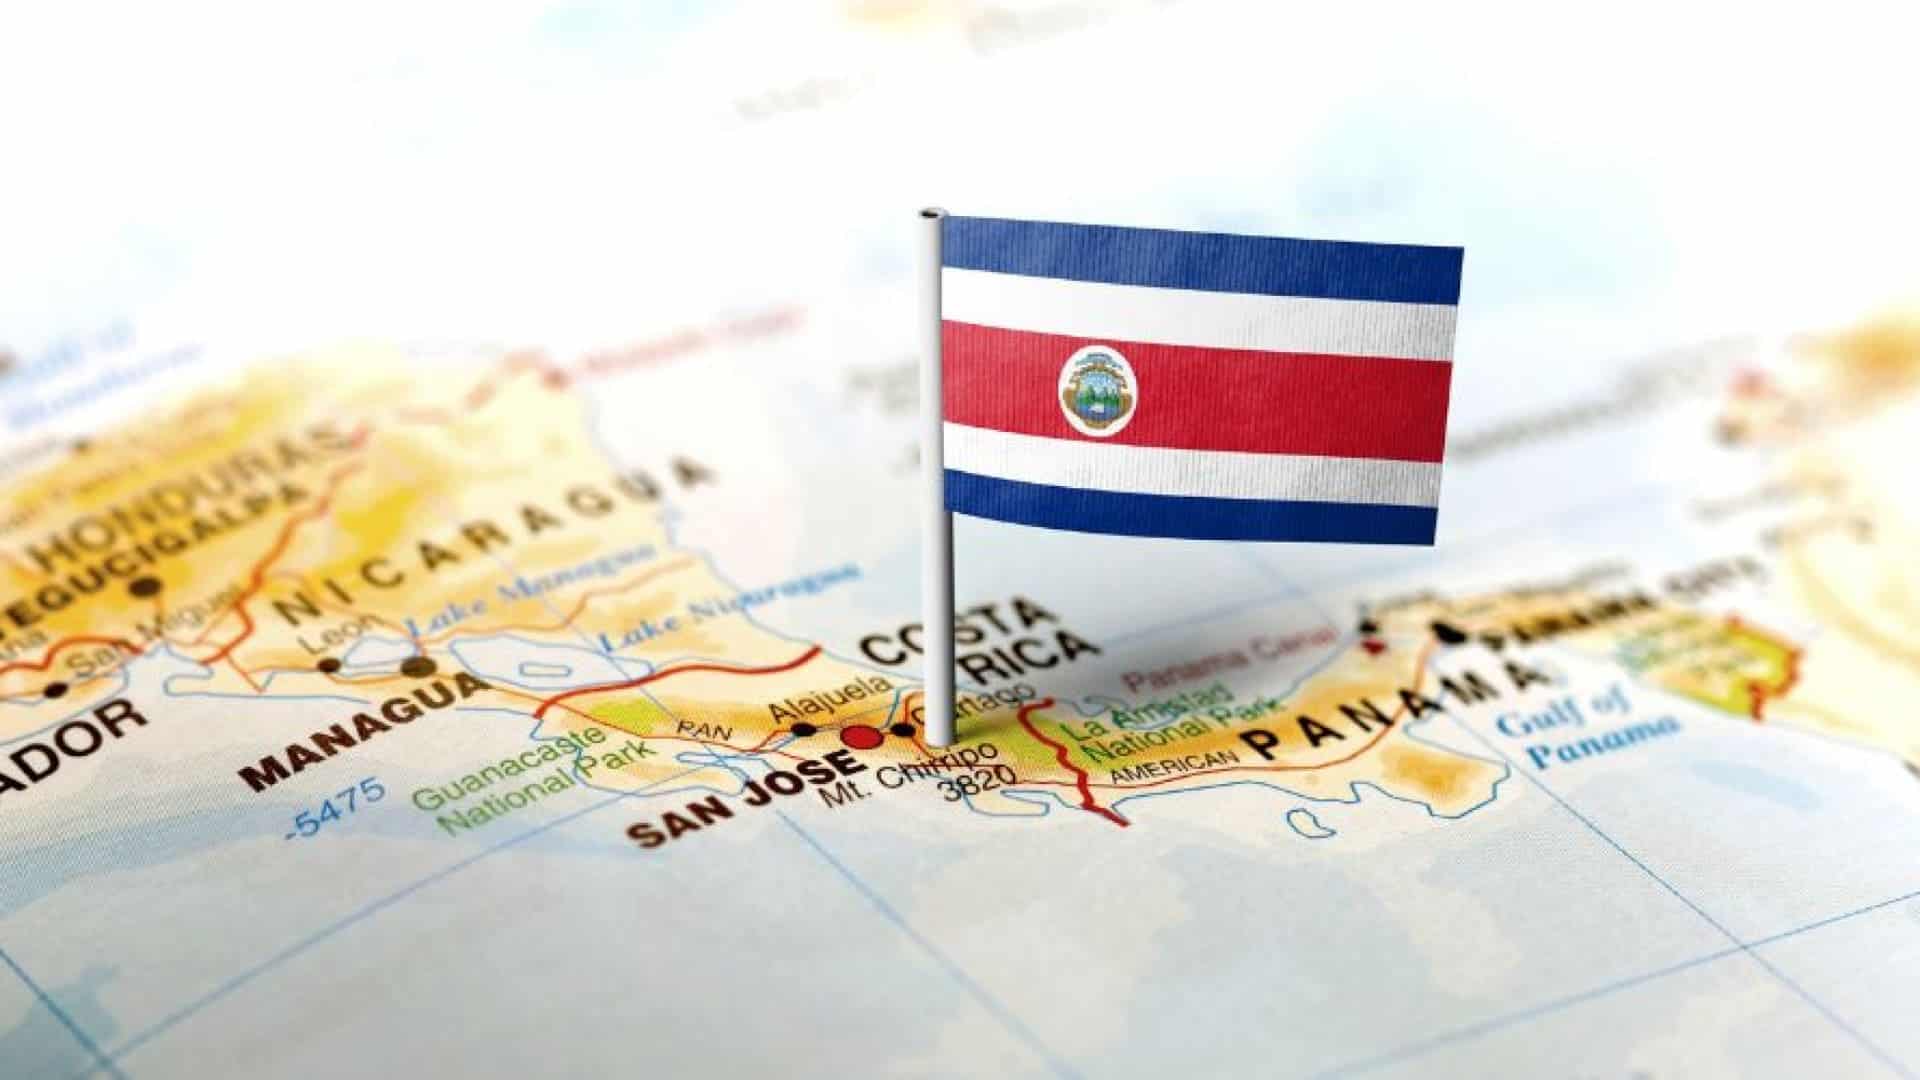 The flag of Costa Rica pinned on the map